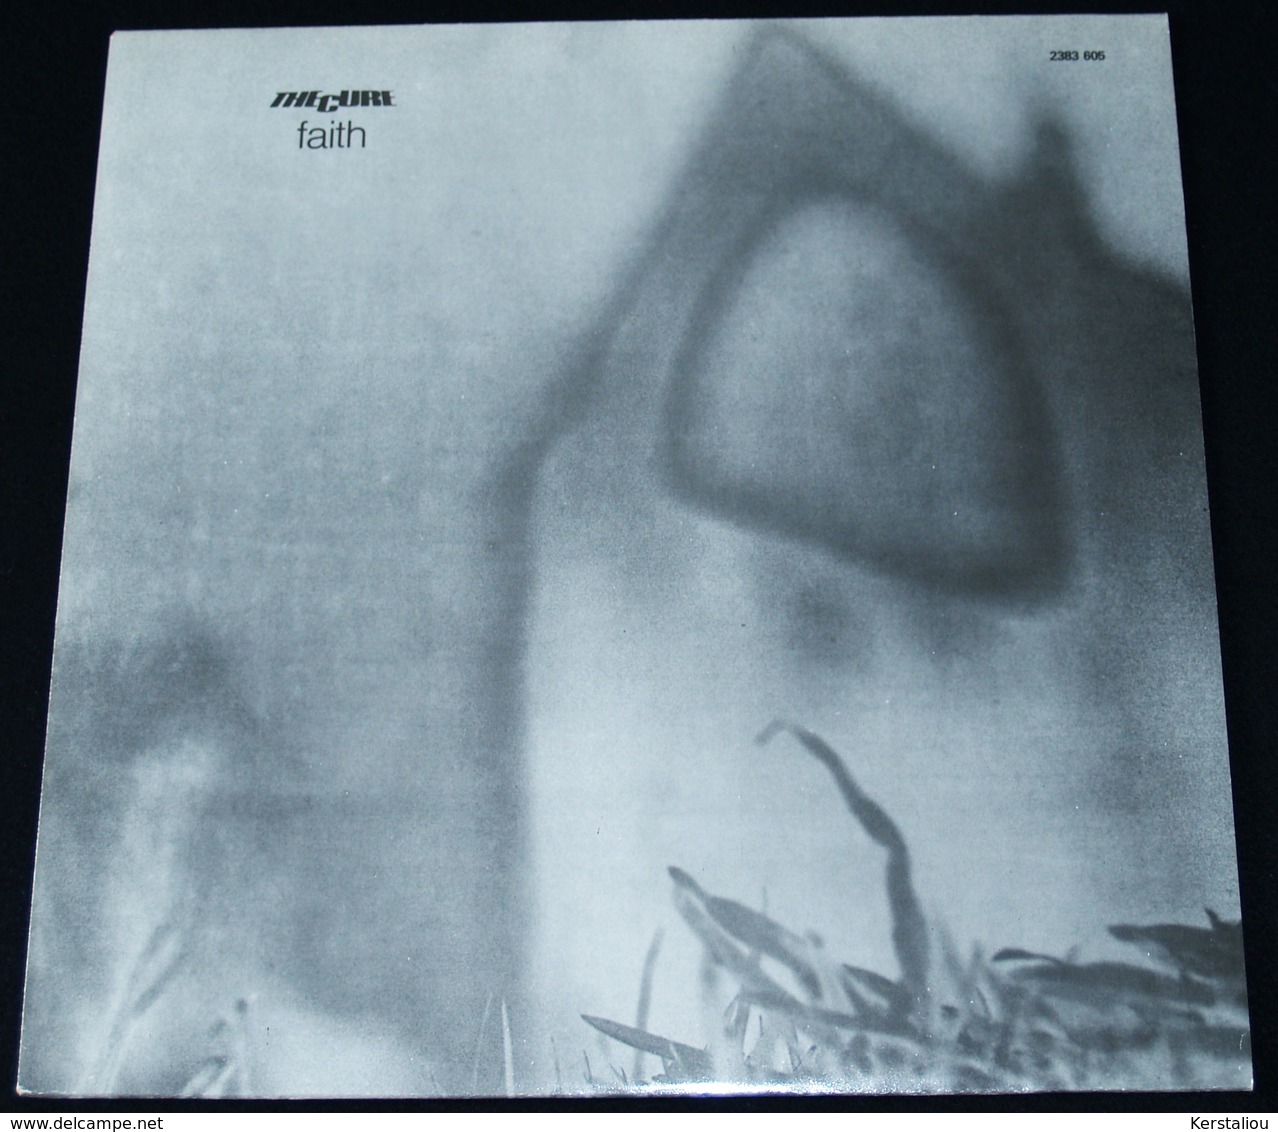 FAITH – THE CURE – LP – 1981 – 2383 605 – Fiction Records/Polydor – Made In France - Rock